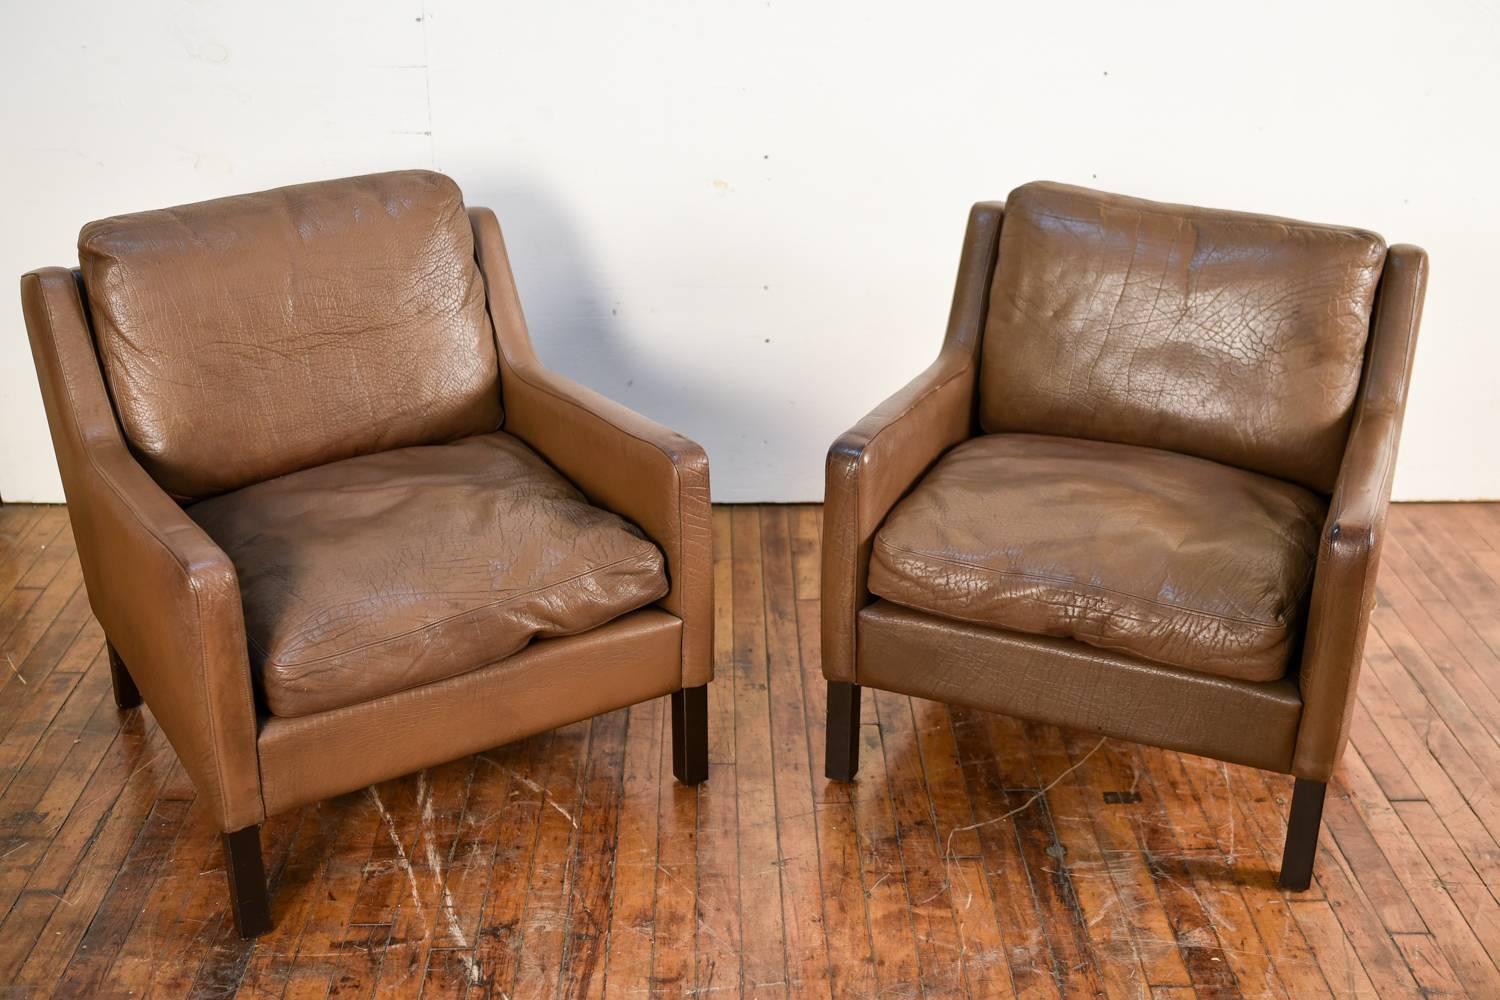 A pair of Danish midcentury easy chairs upholstered in beautiful vintage leather, in the style of Børge Mogensen.